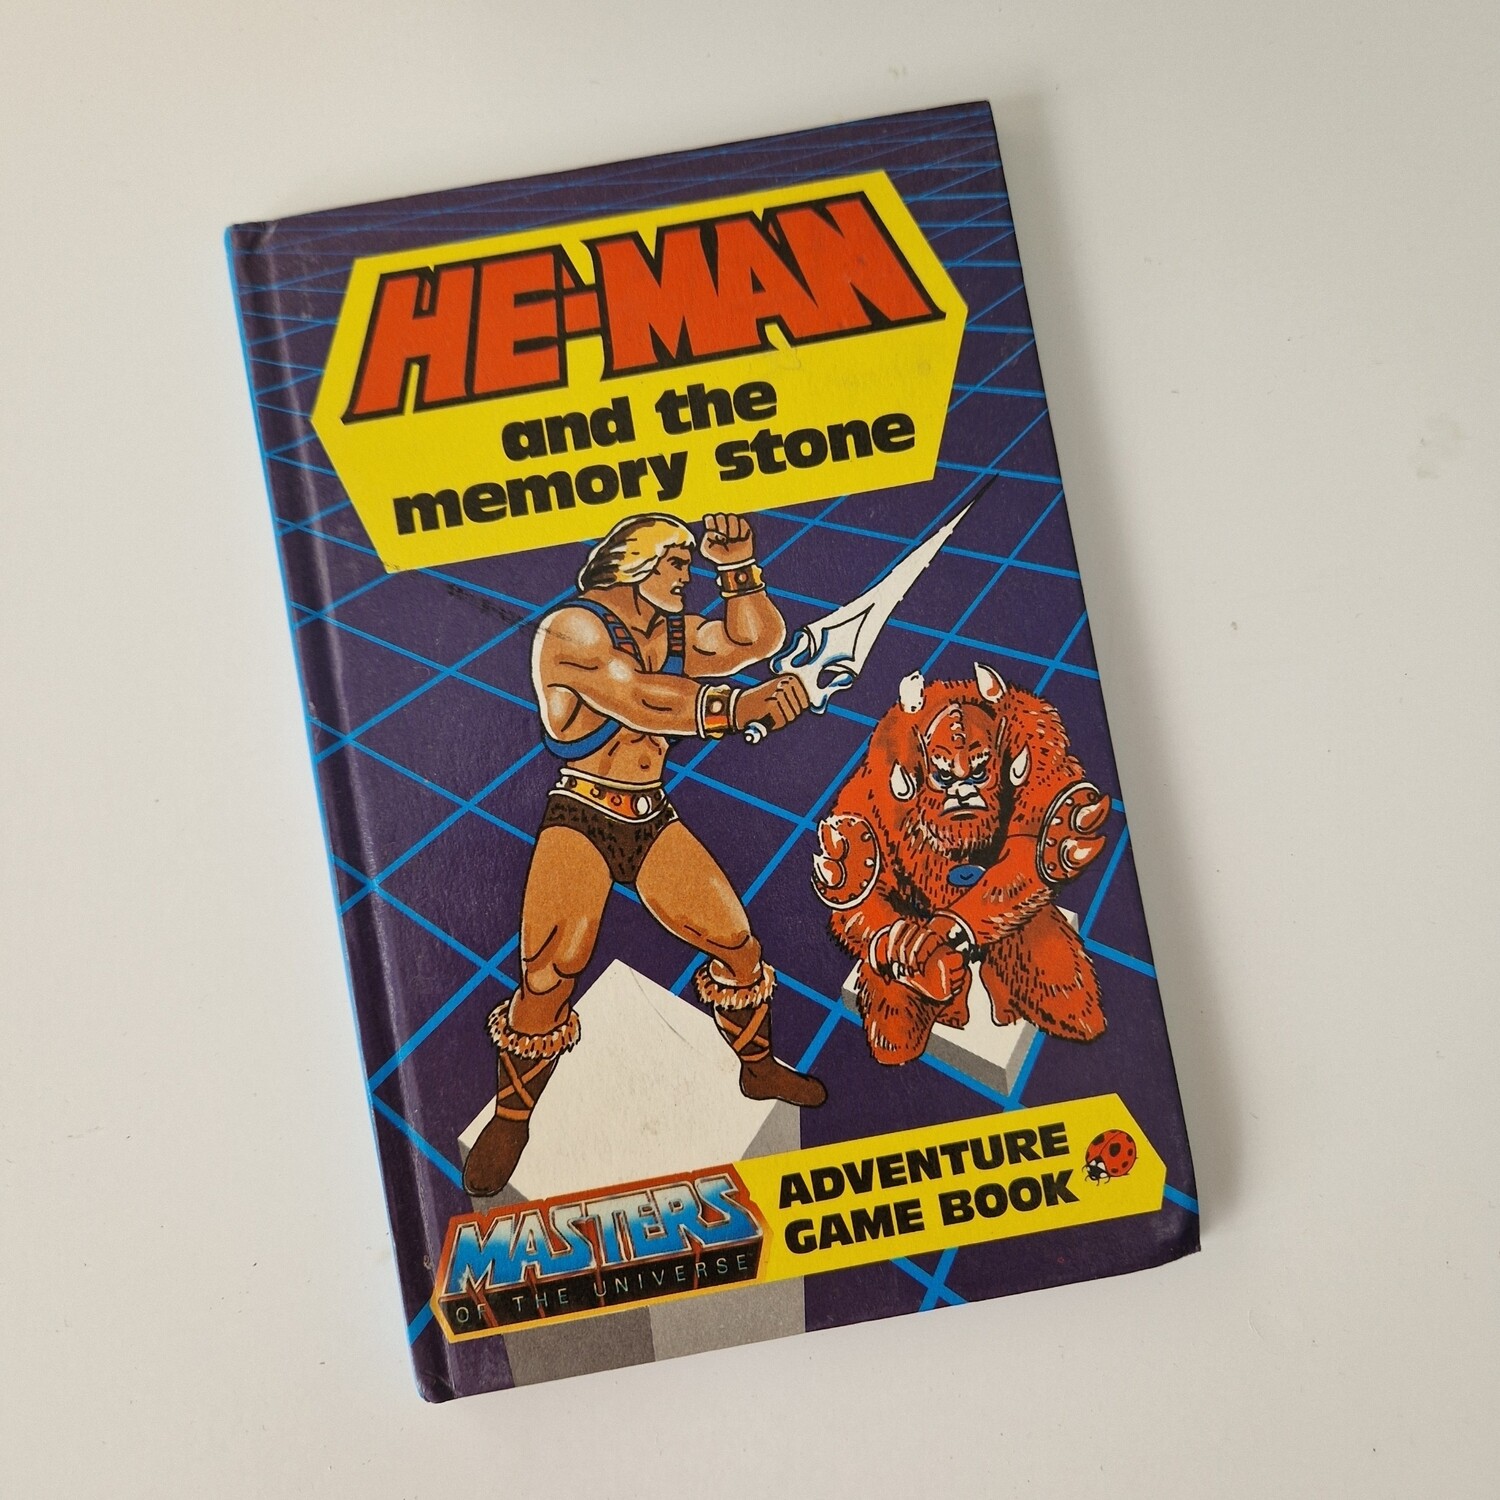 He-Man and the memory stone